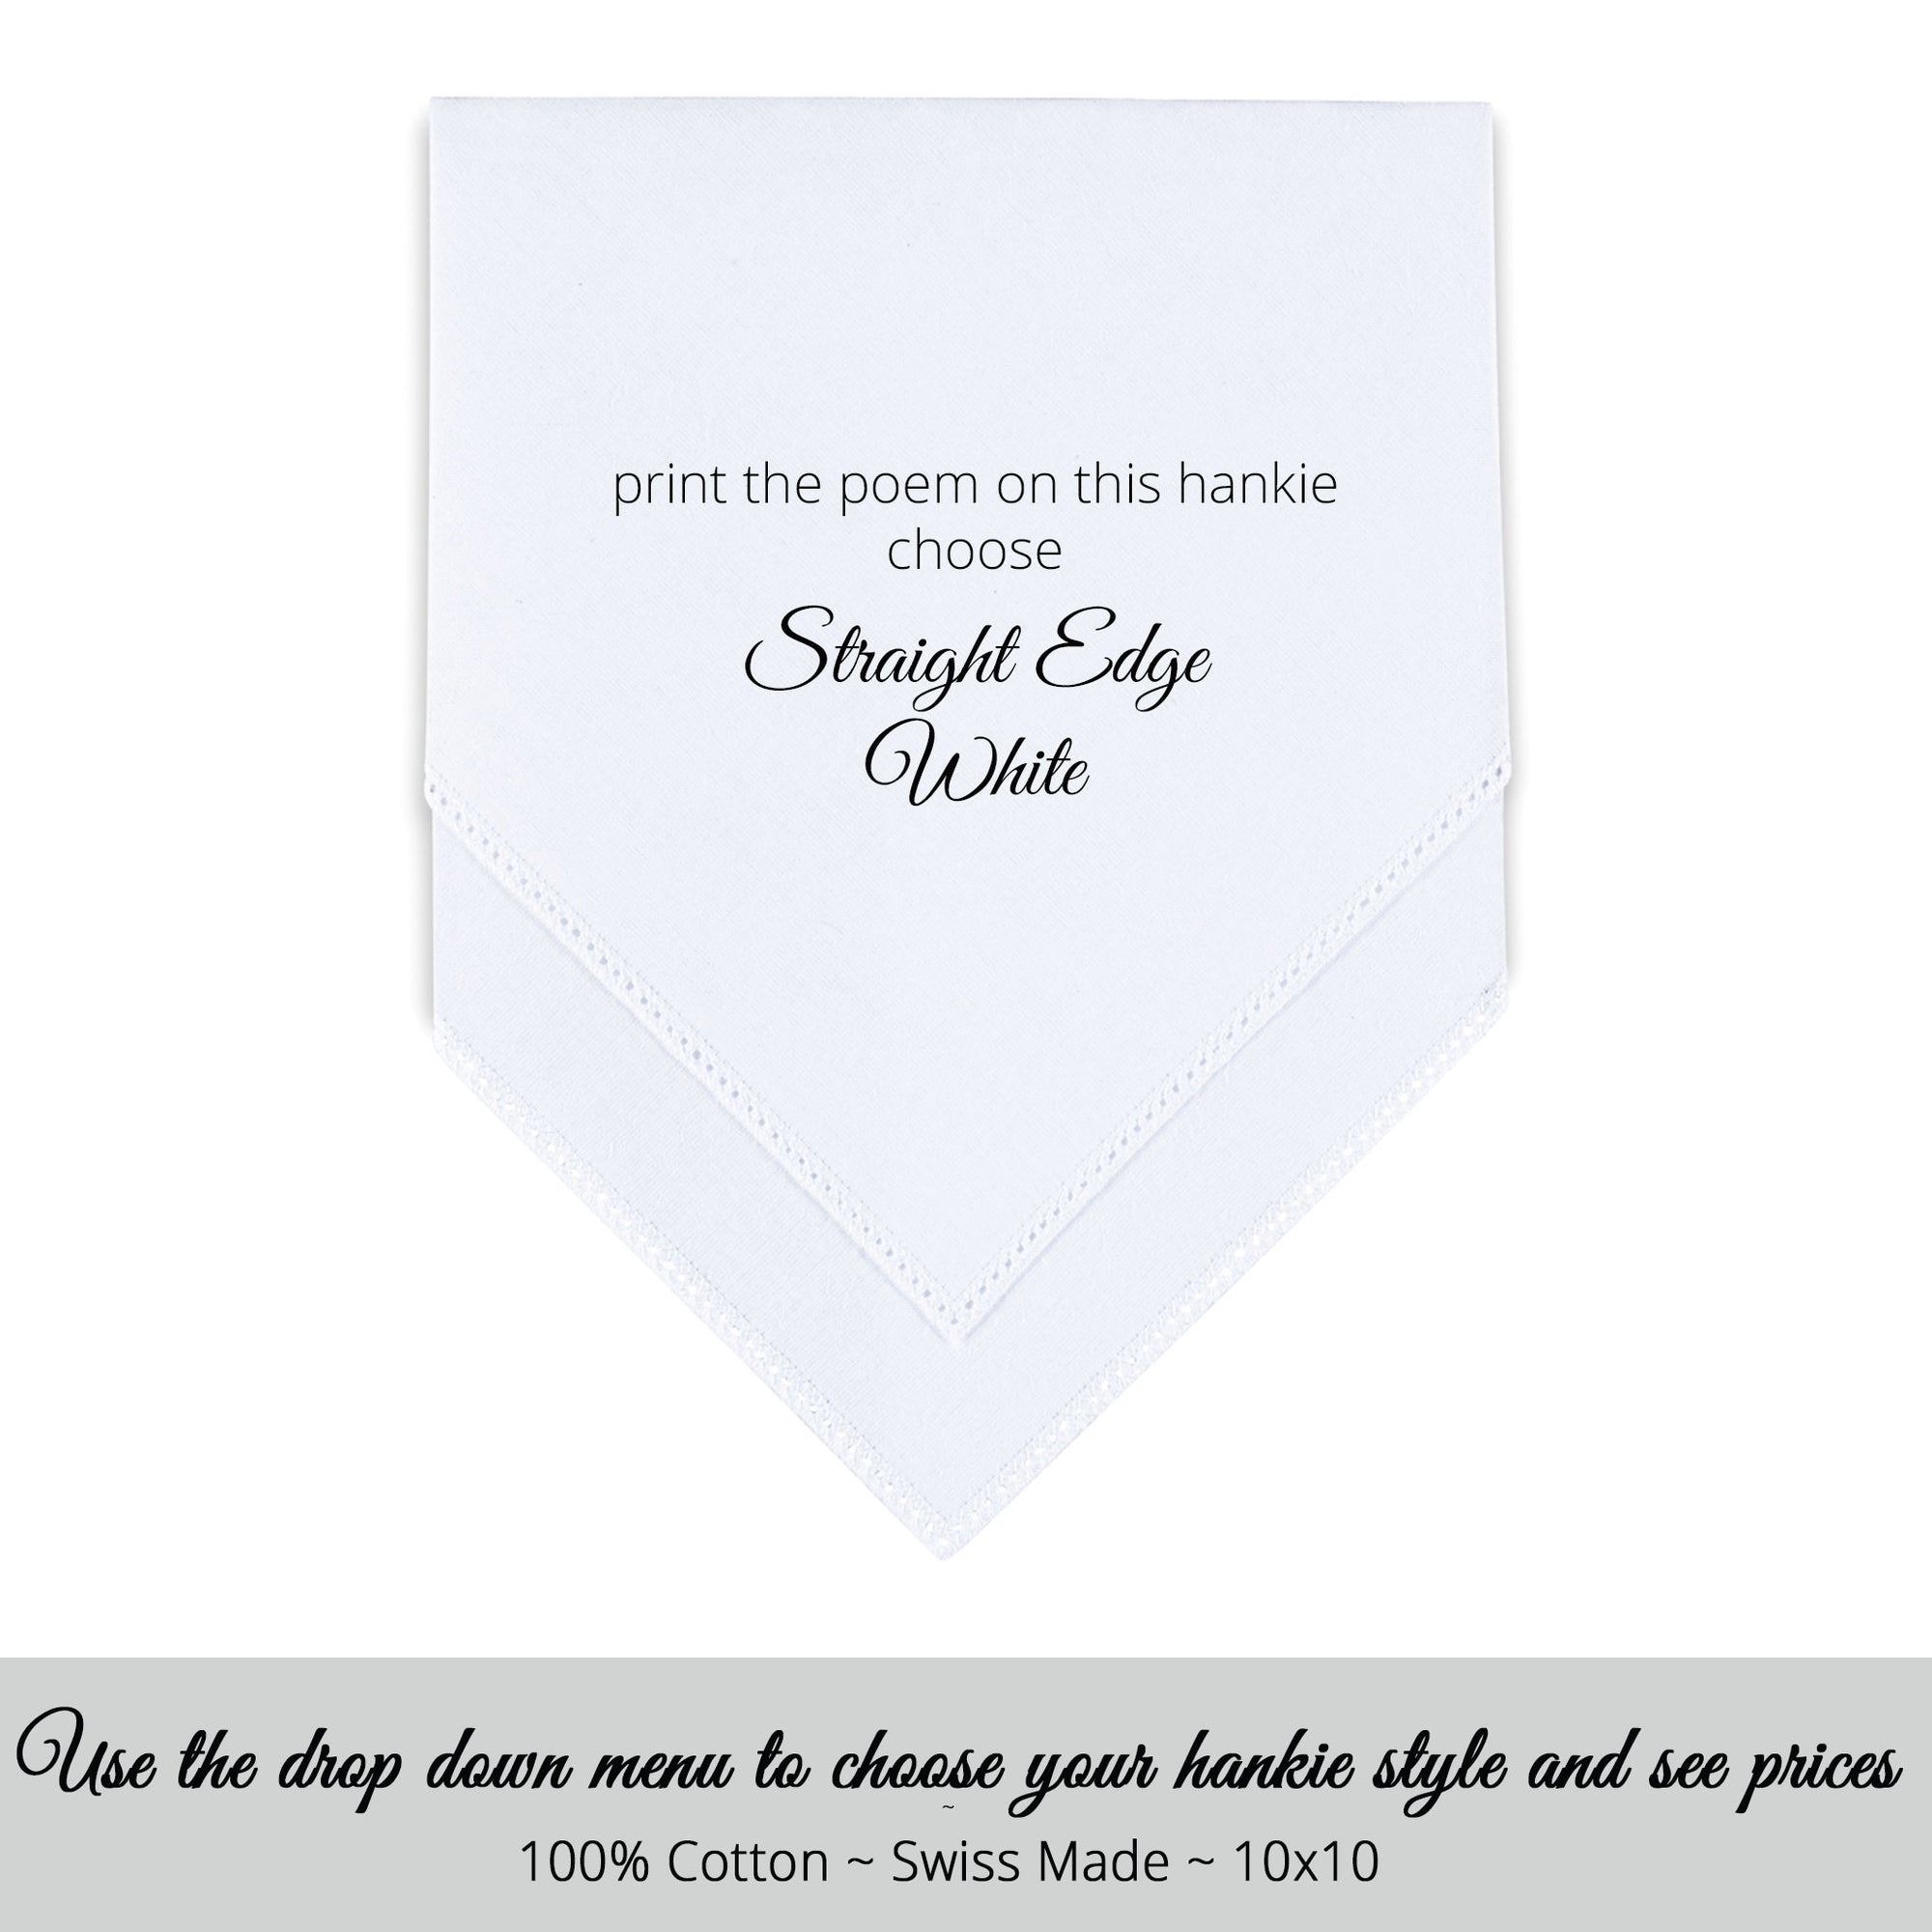 Poem Printed Wedding Hankie for the Bride from Her Dog "At First I Smelled Him"